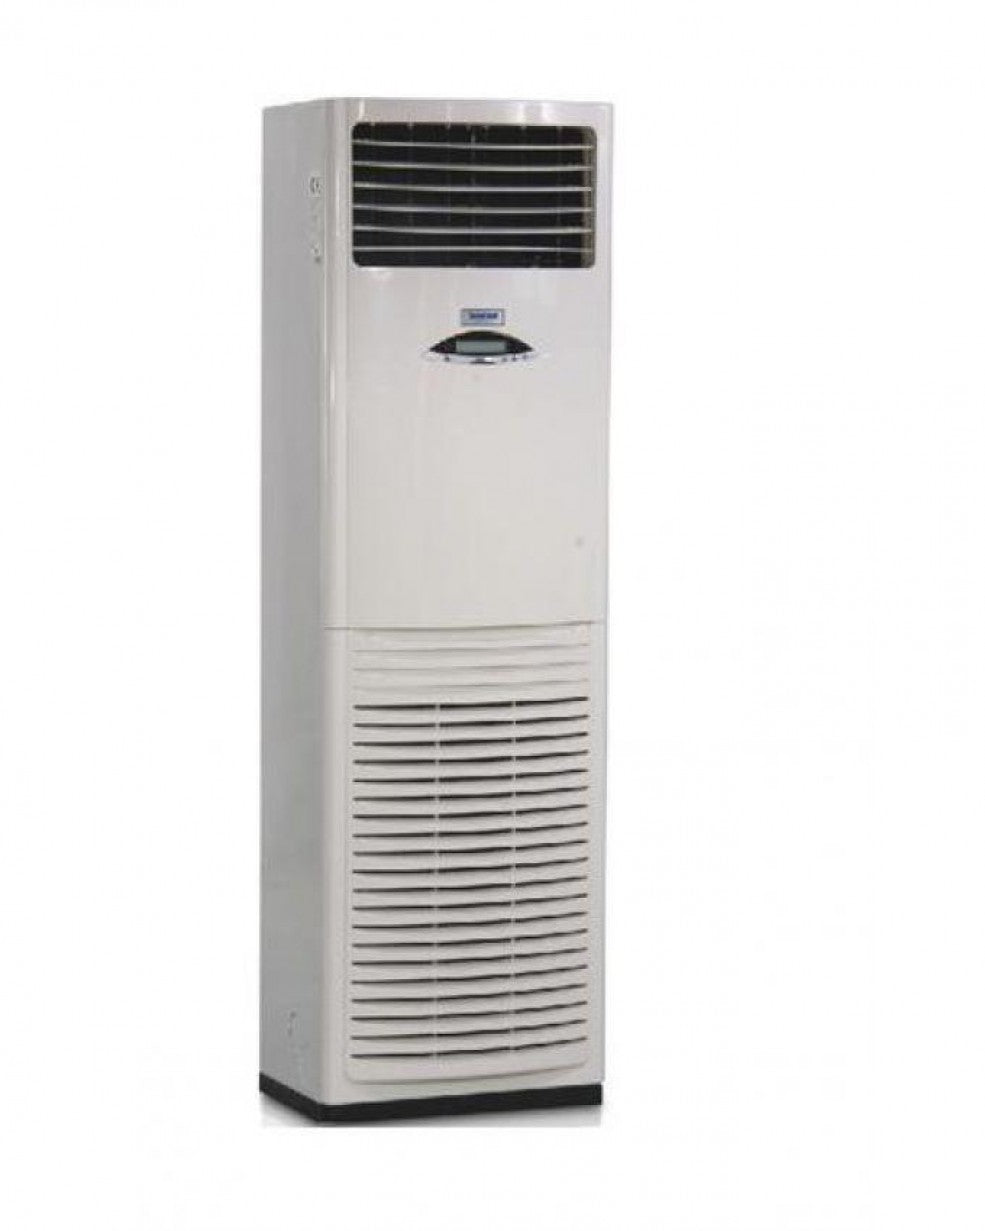 Scanfrost 6HP Floor Standing AC SFACFS48K With Free Installation kit